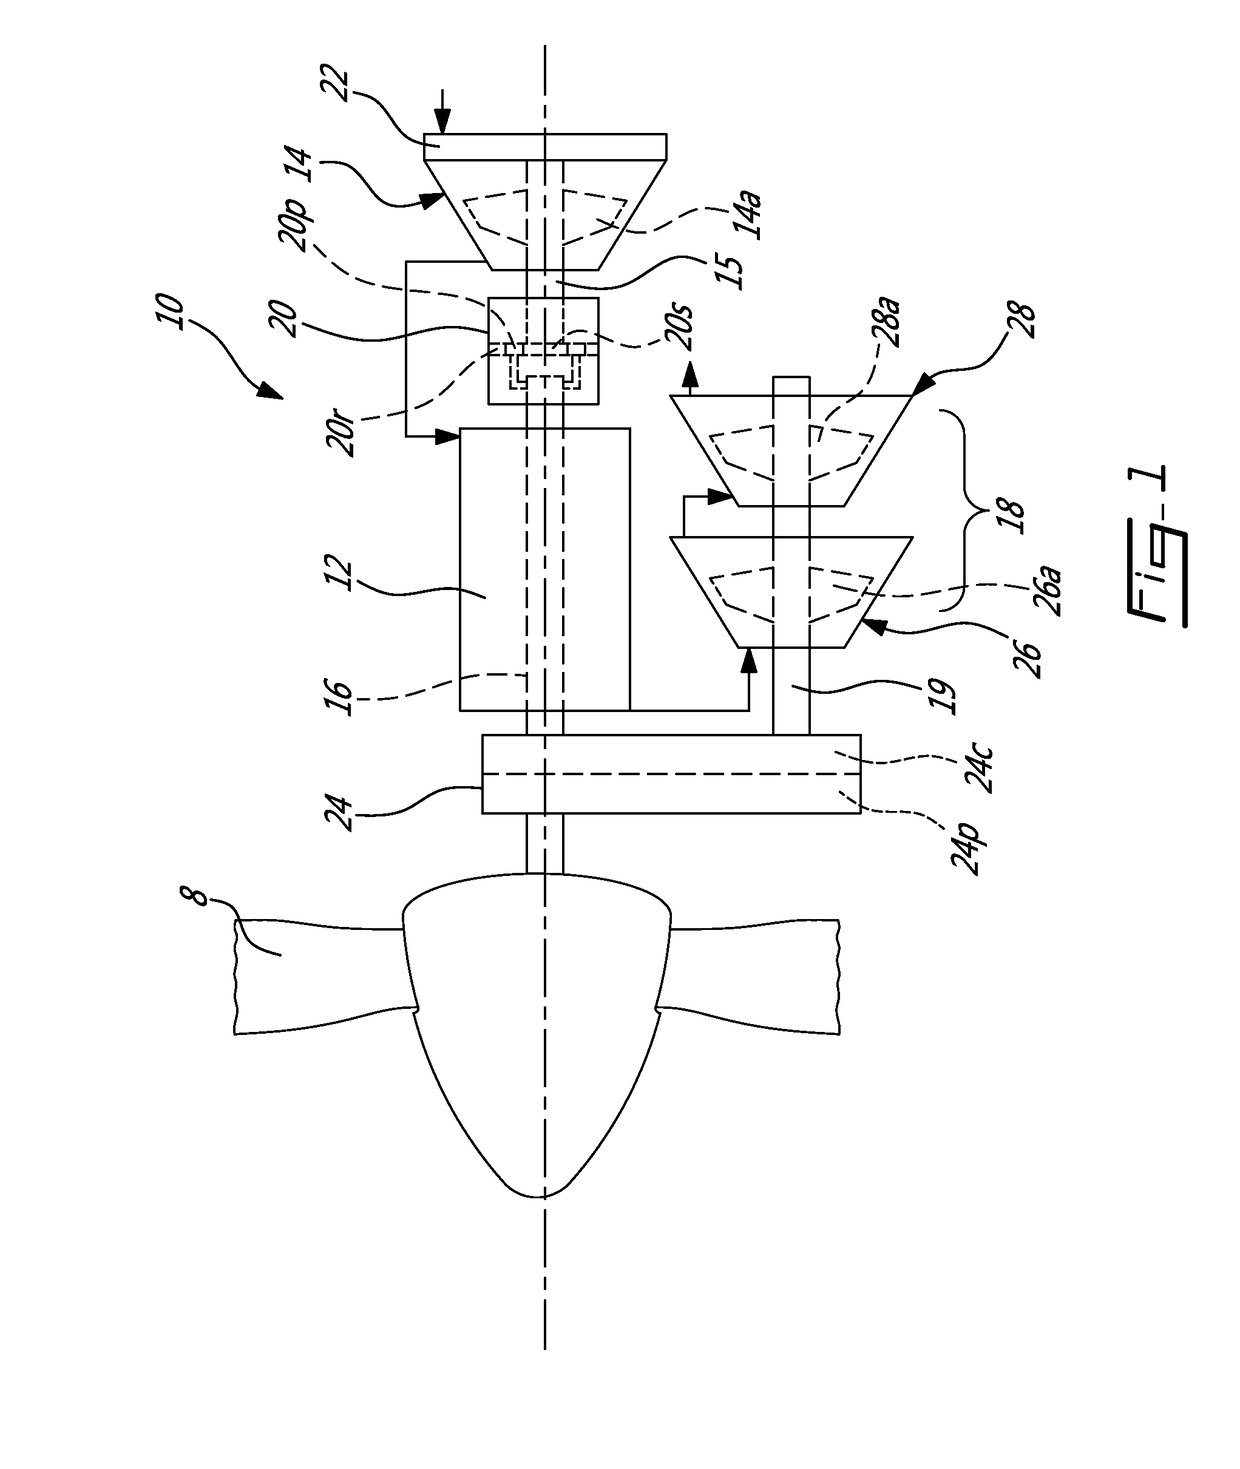 Compound engine assembly with coaxial compressor and offset turbine section